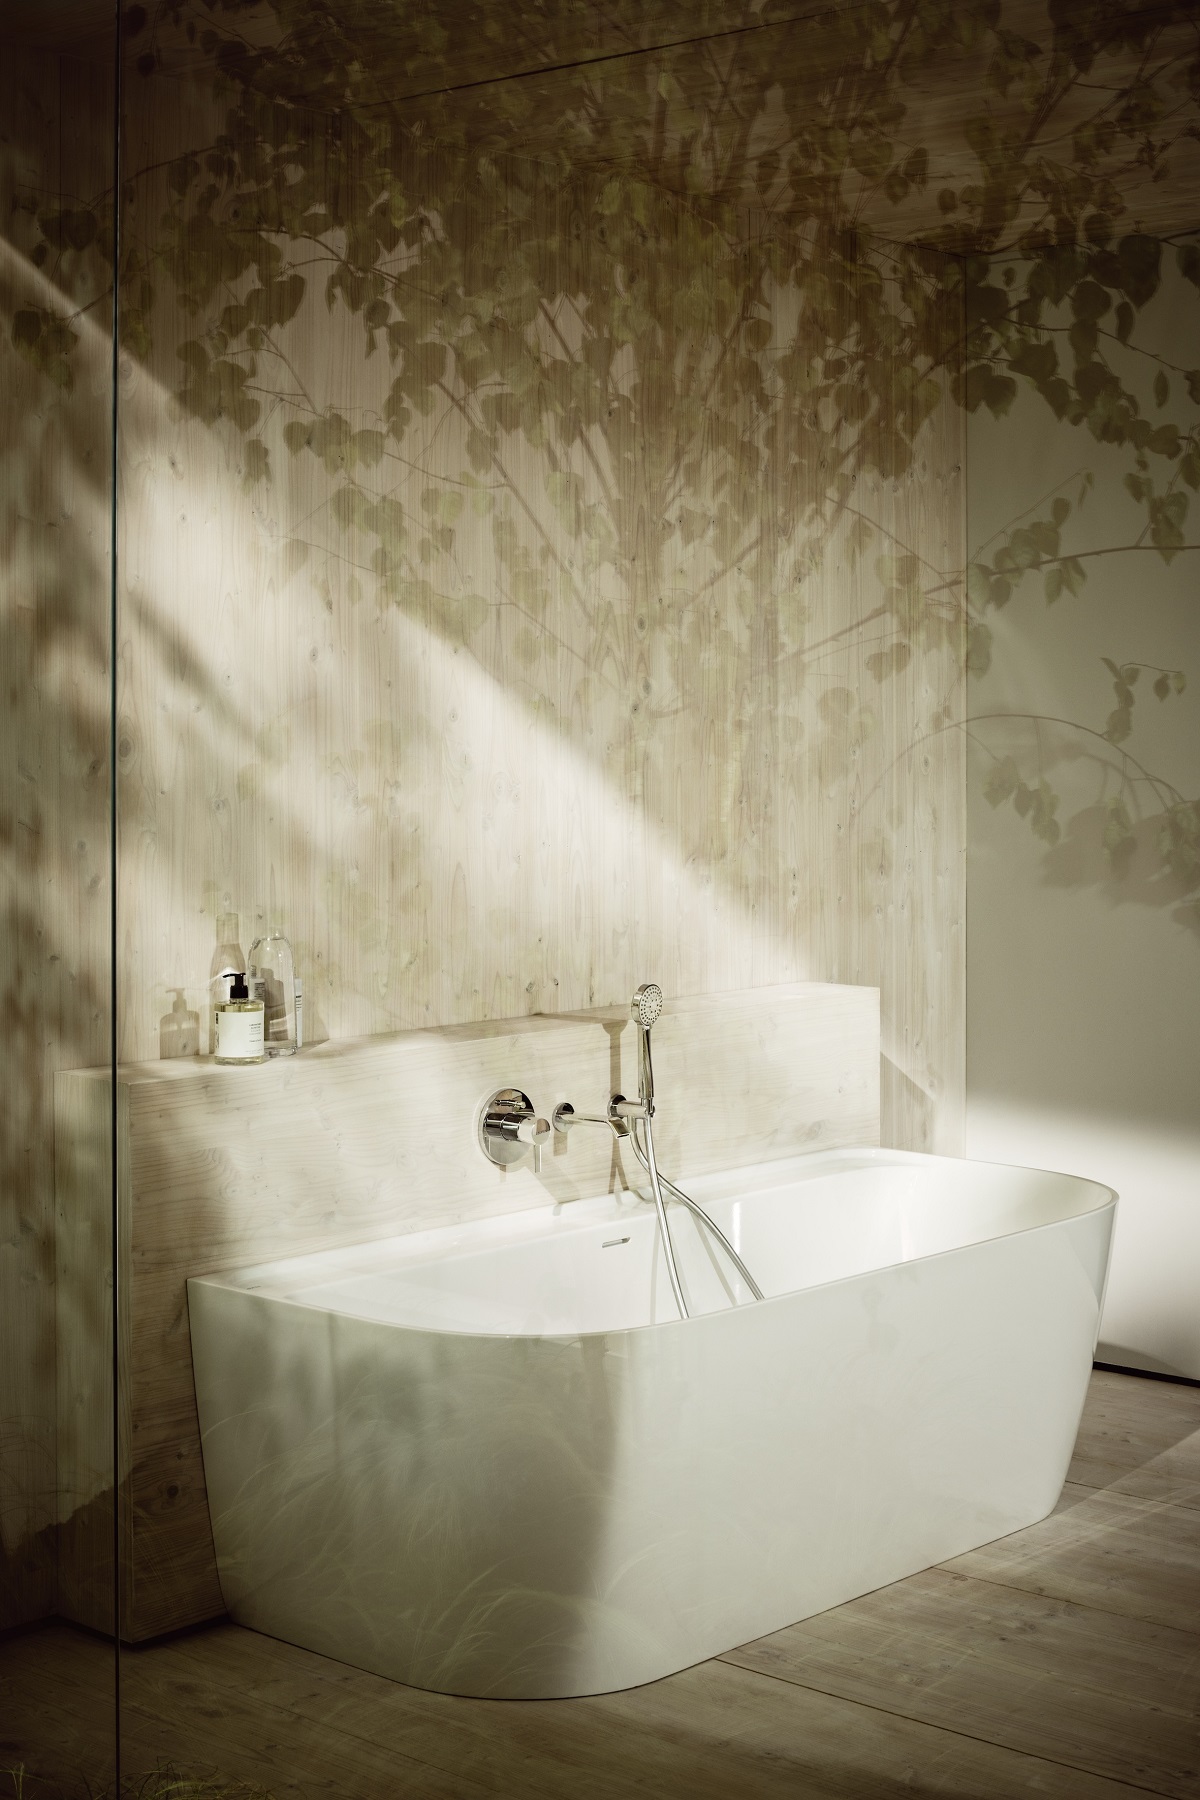 curved freestanding bath set against the wall